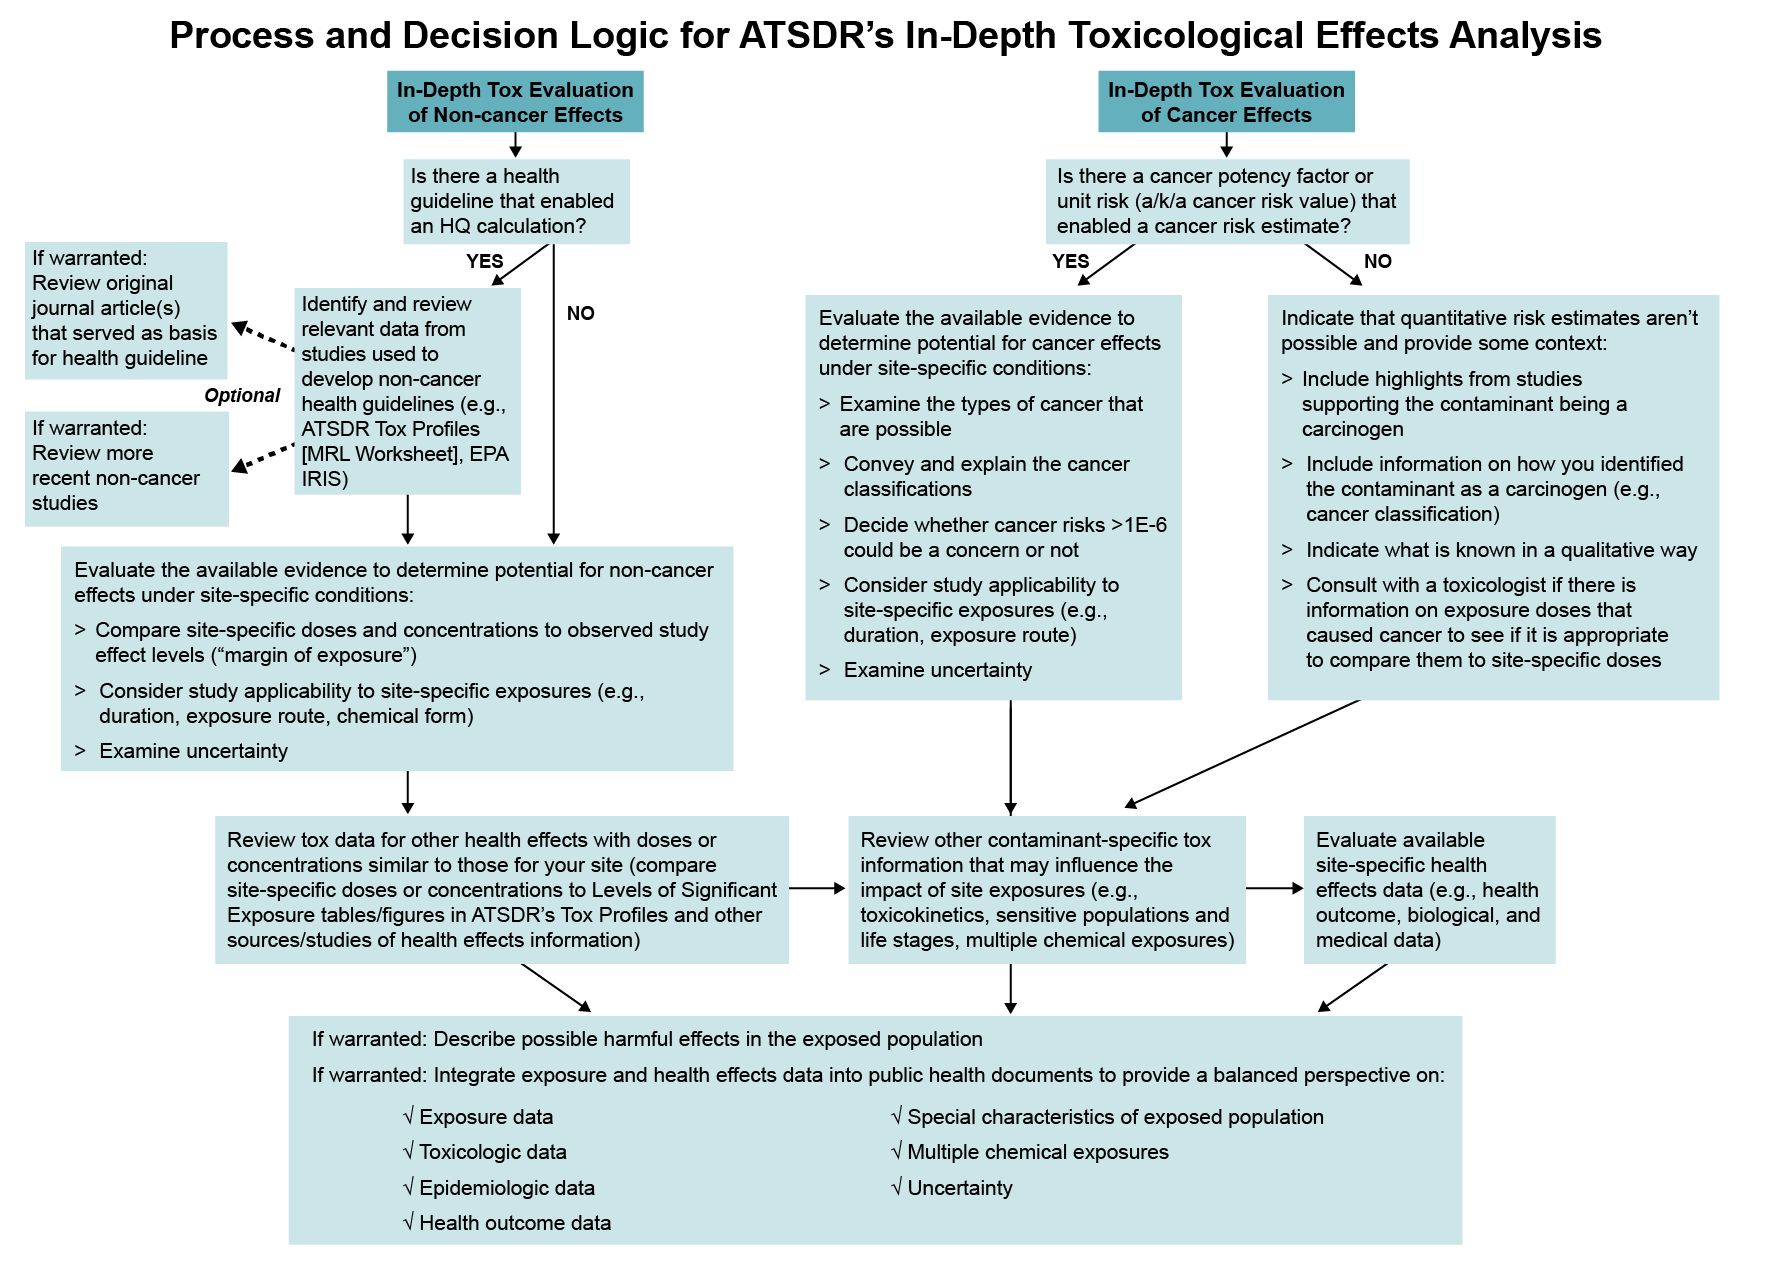 Diagram showing process and decision logic for ATSDR's In-Depth Toxicological Effects Analysis. Detailed description below.